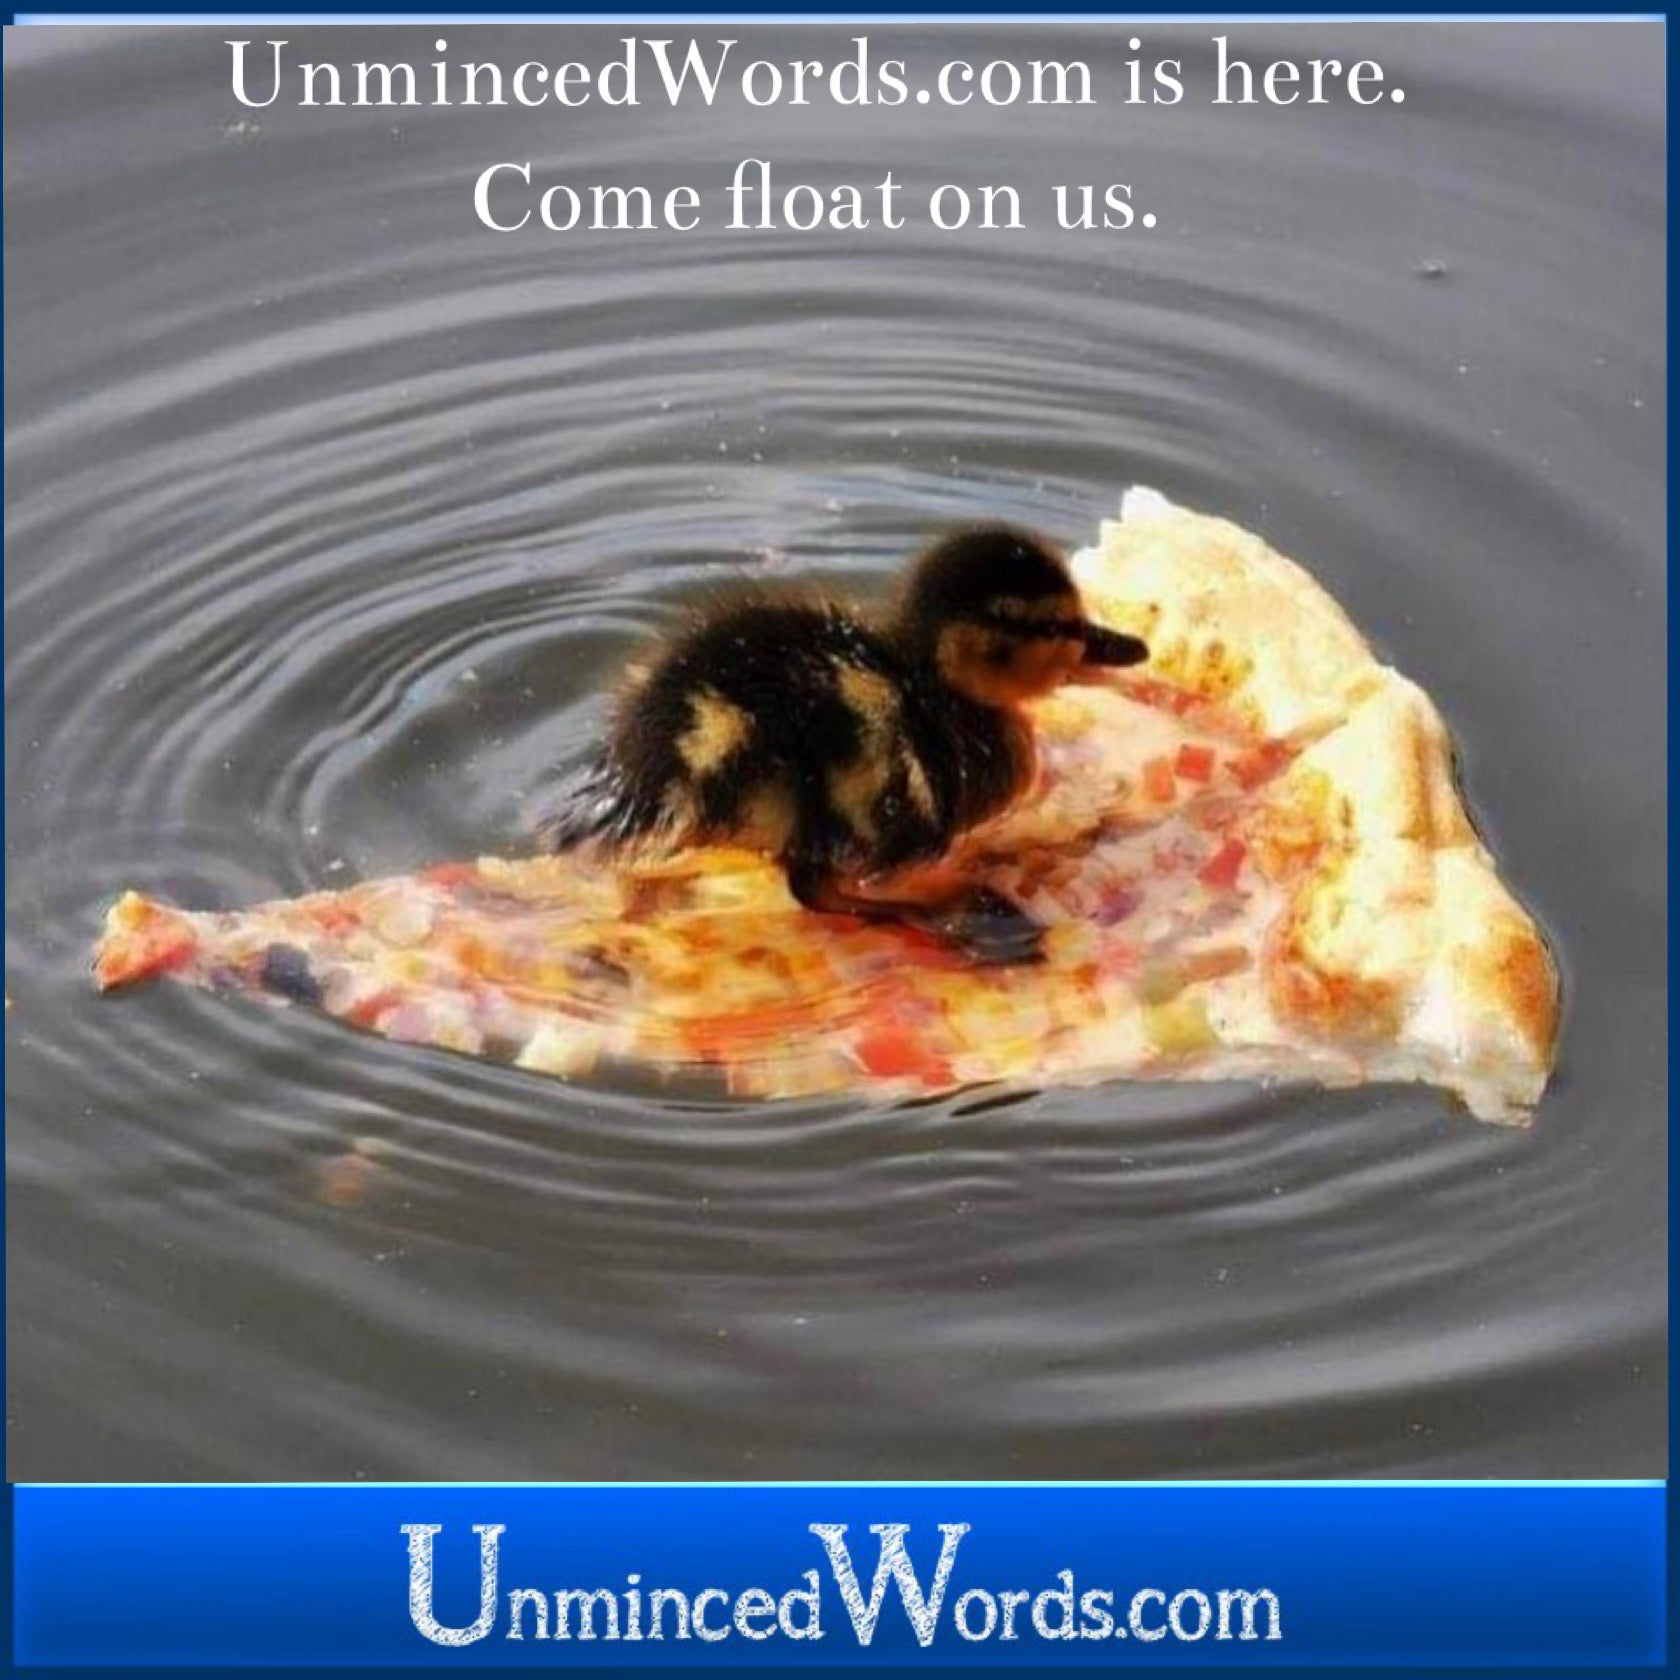 UnmincedWords is here for you. Come float on us.